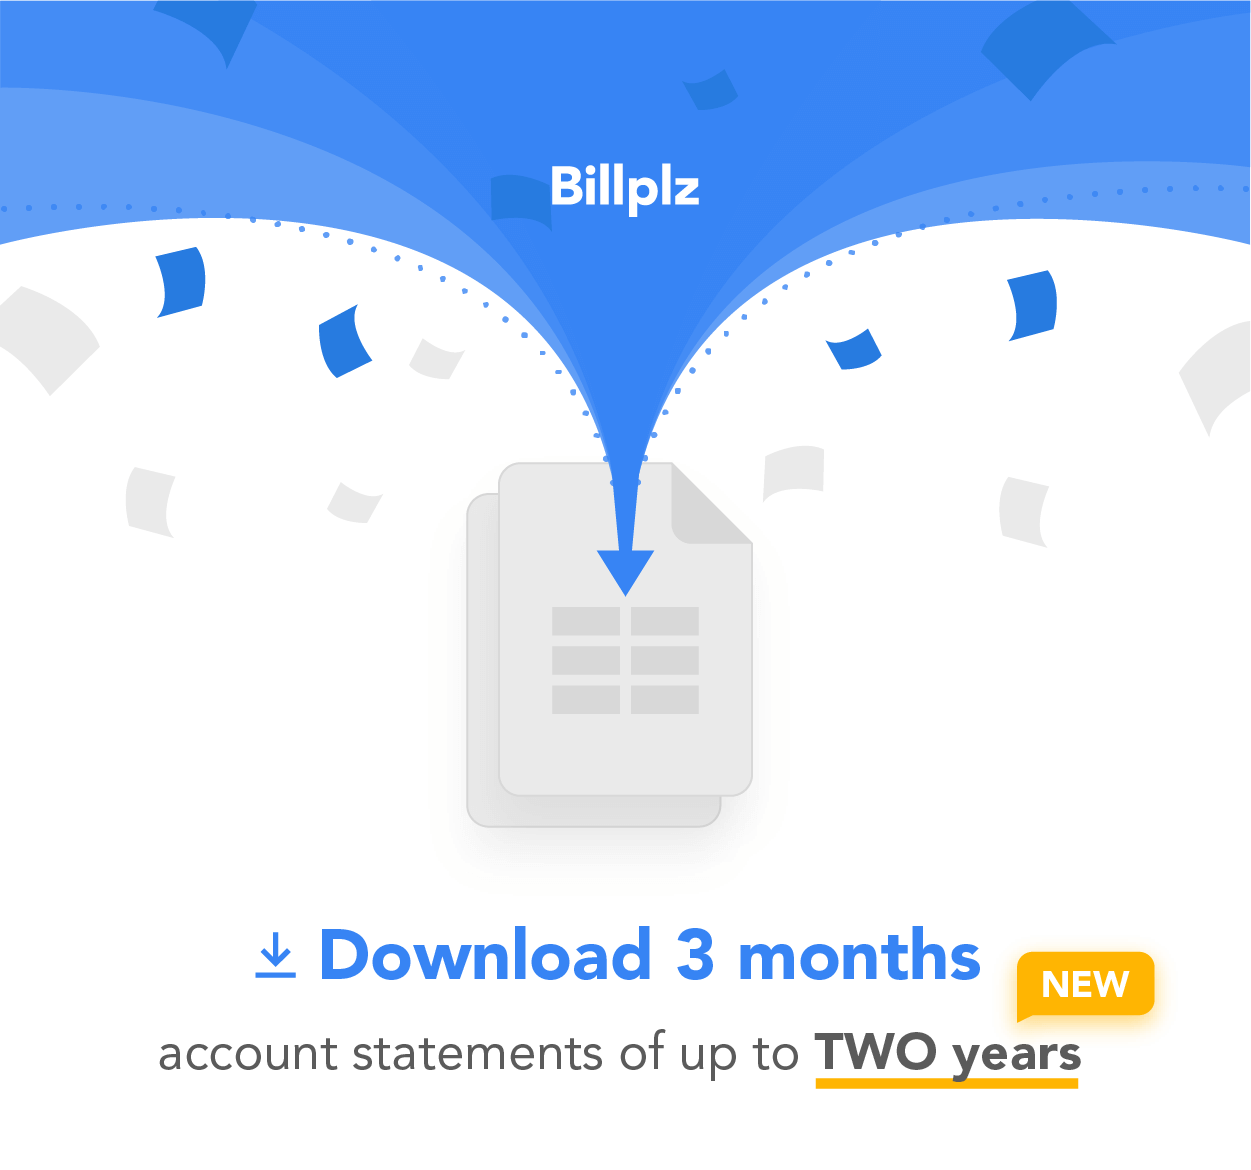 New Features! Download 3 months account statements of up to TWO years